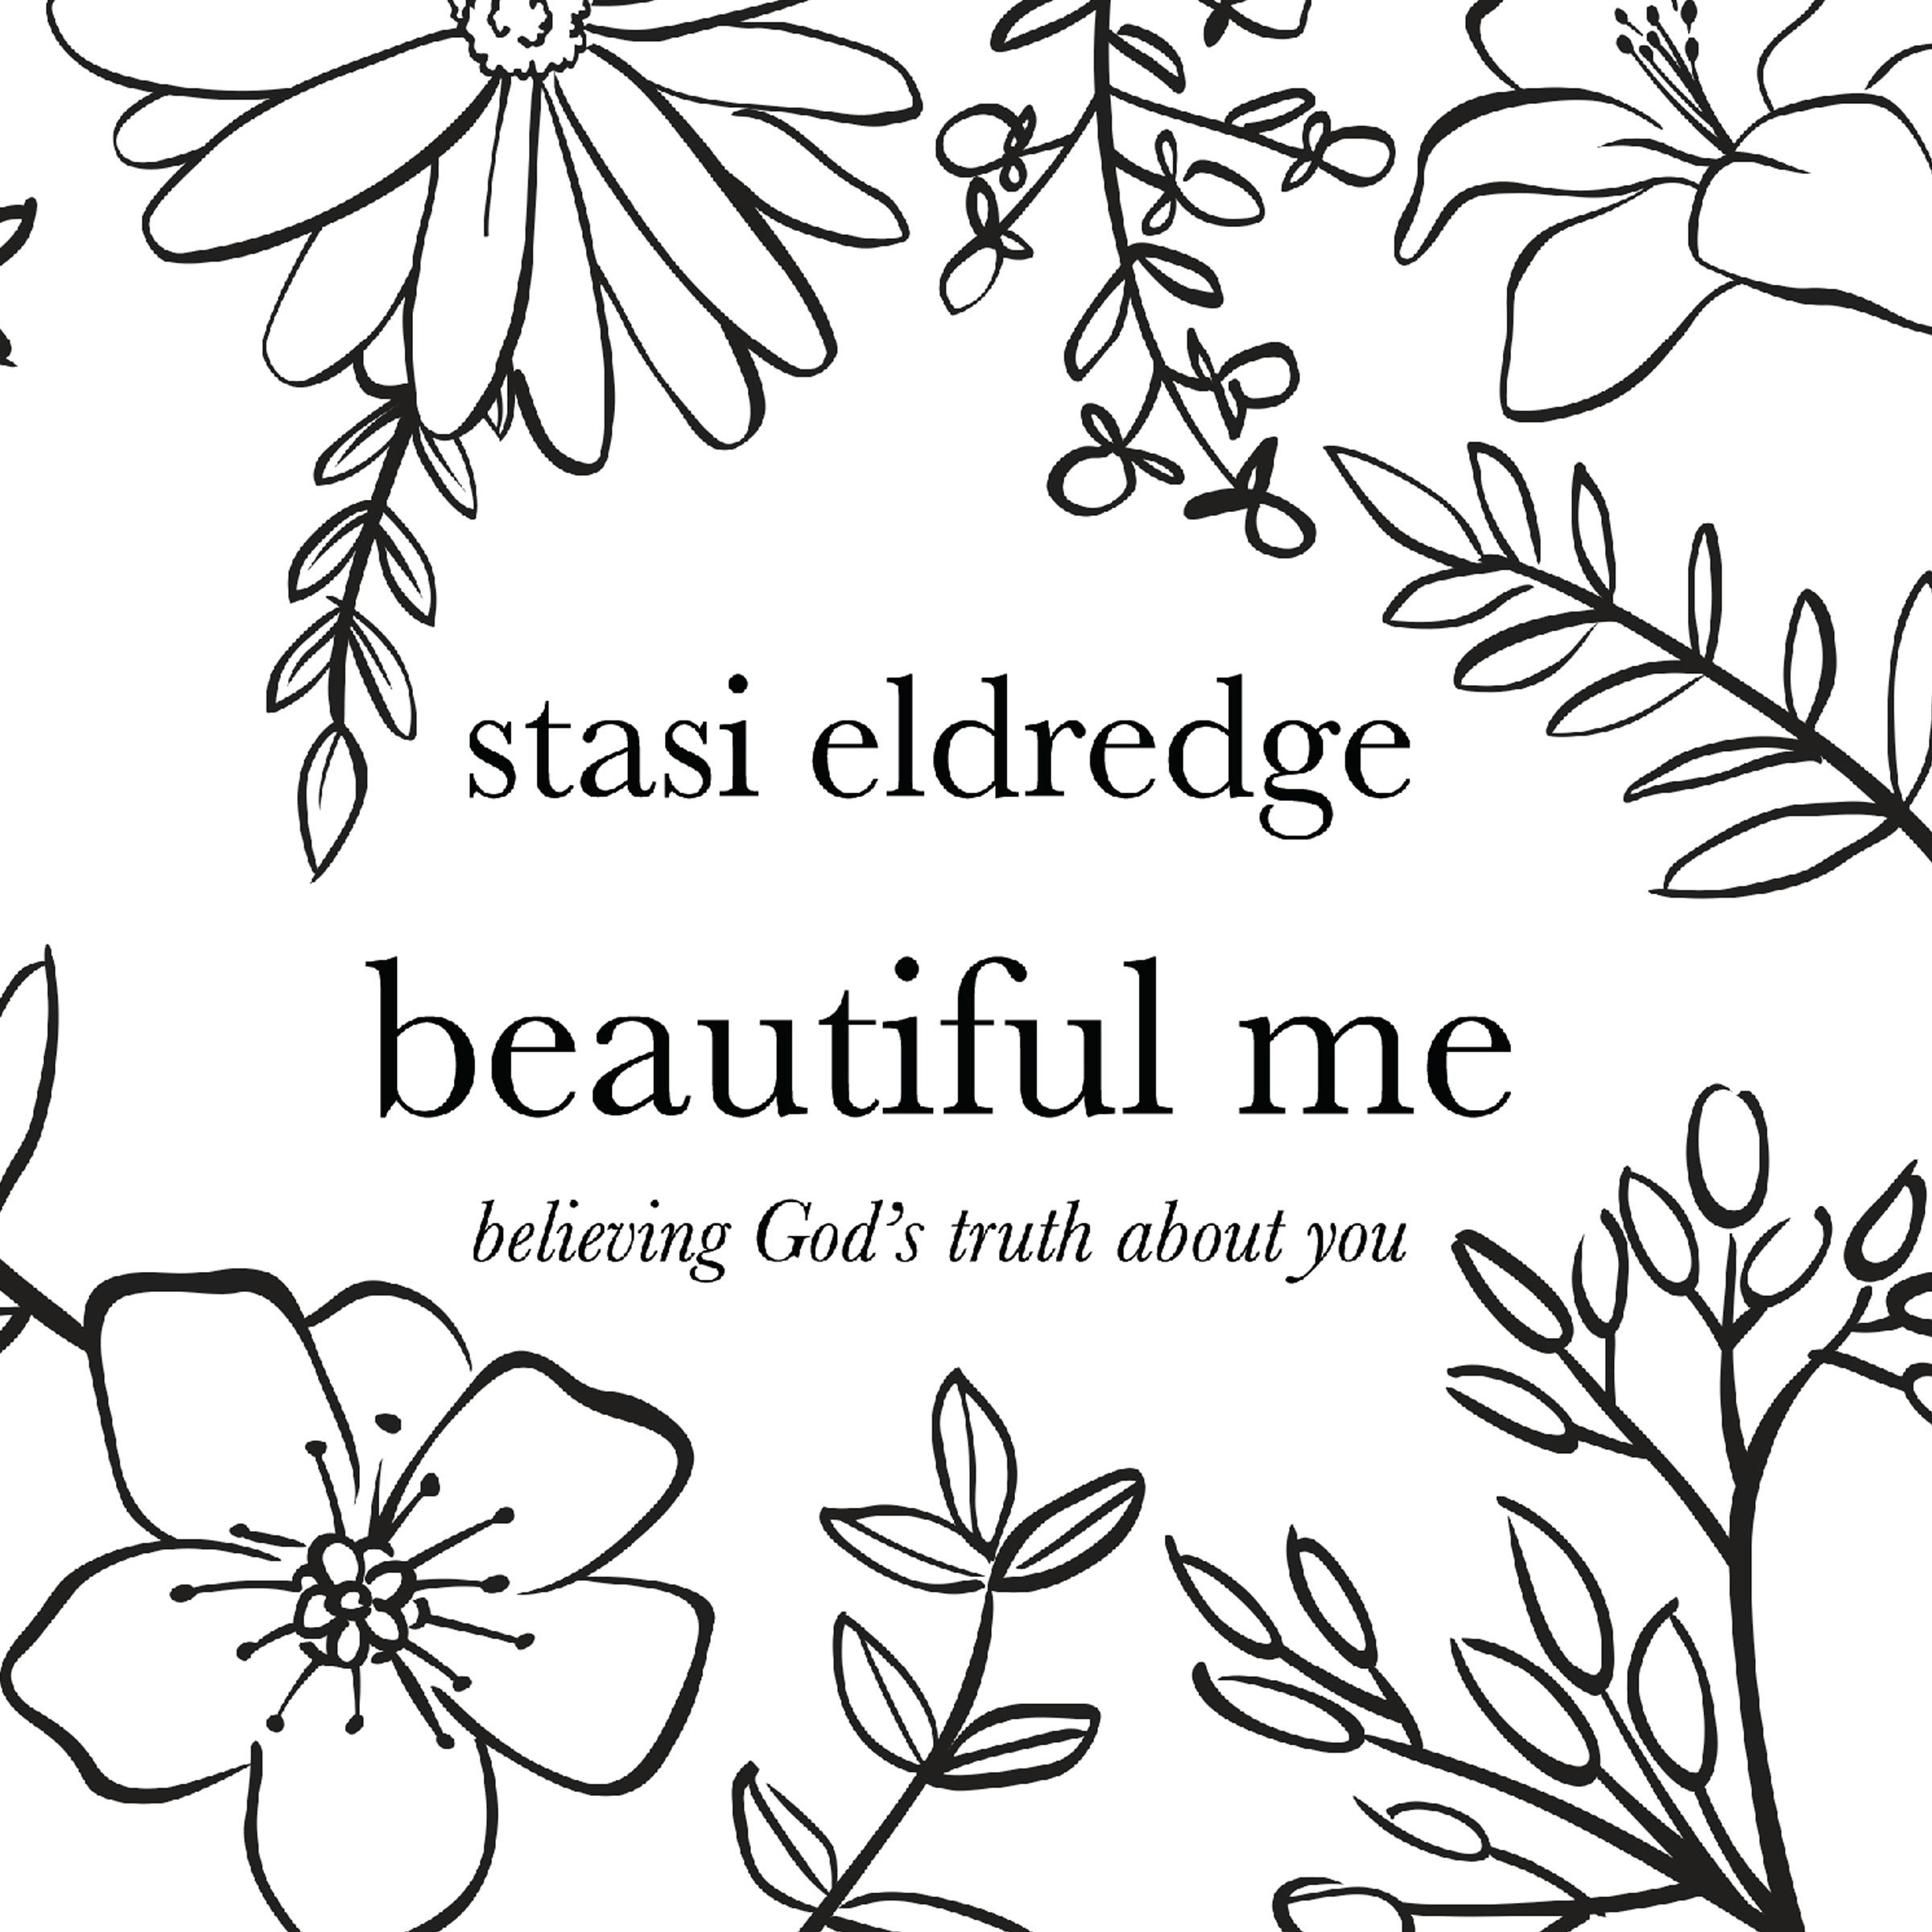 Beautiful Me: Believing God's Truth About You - undefined